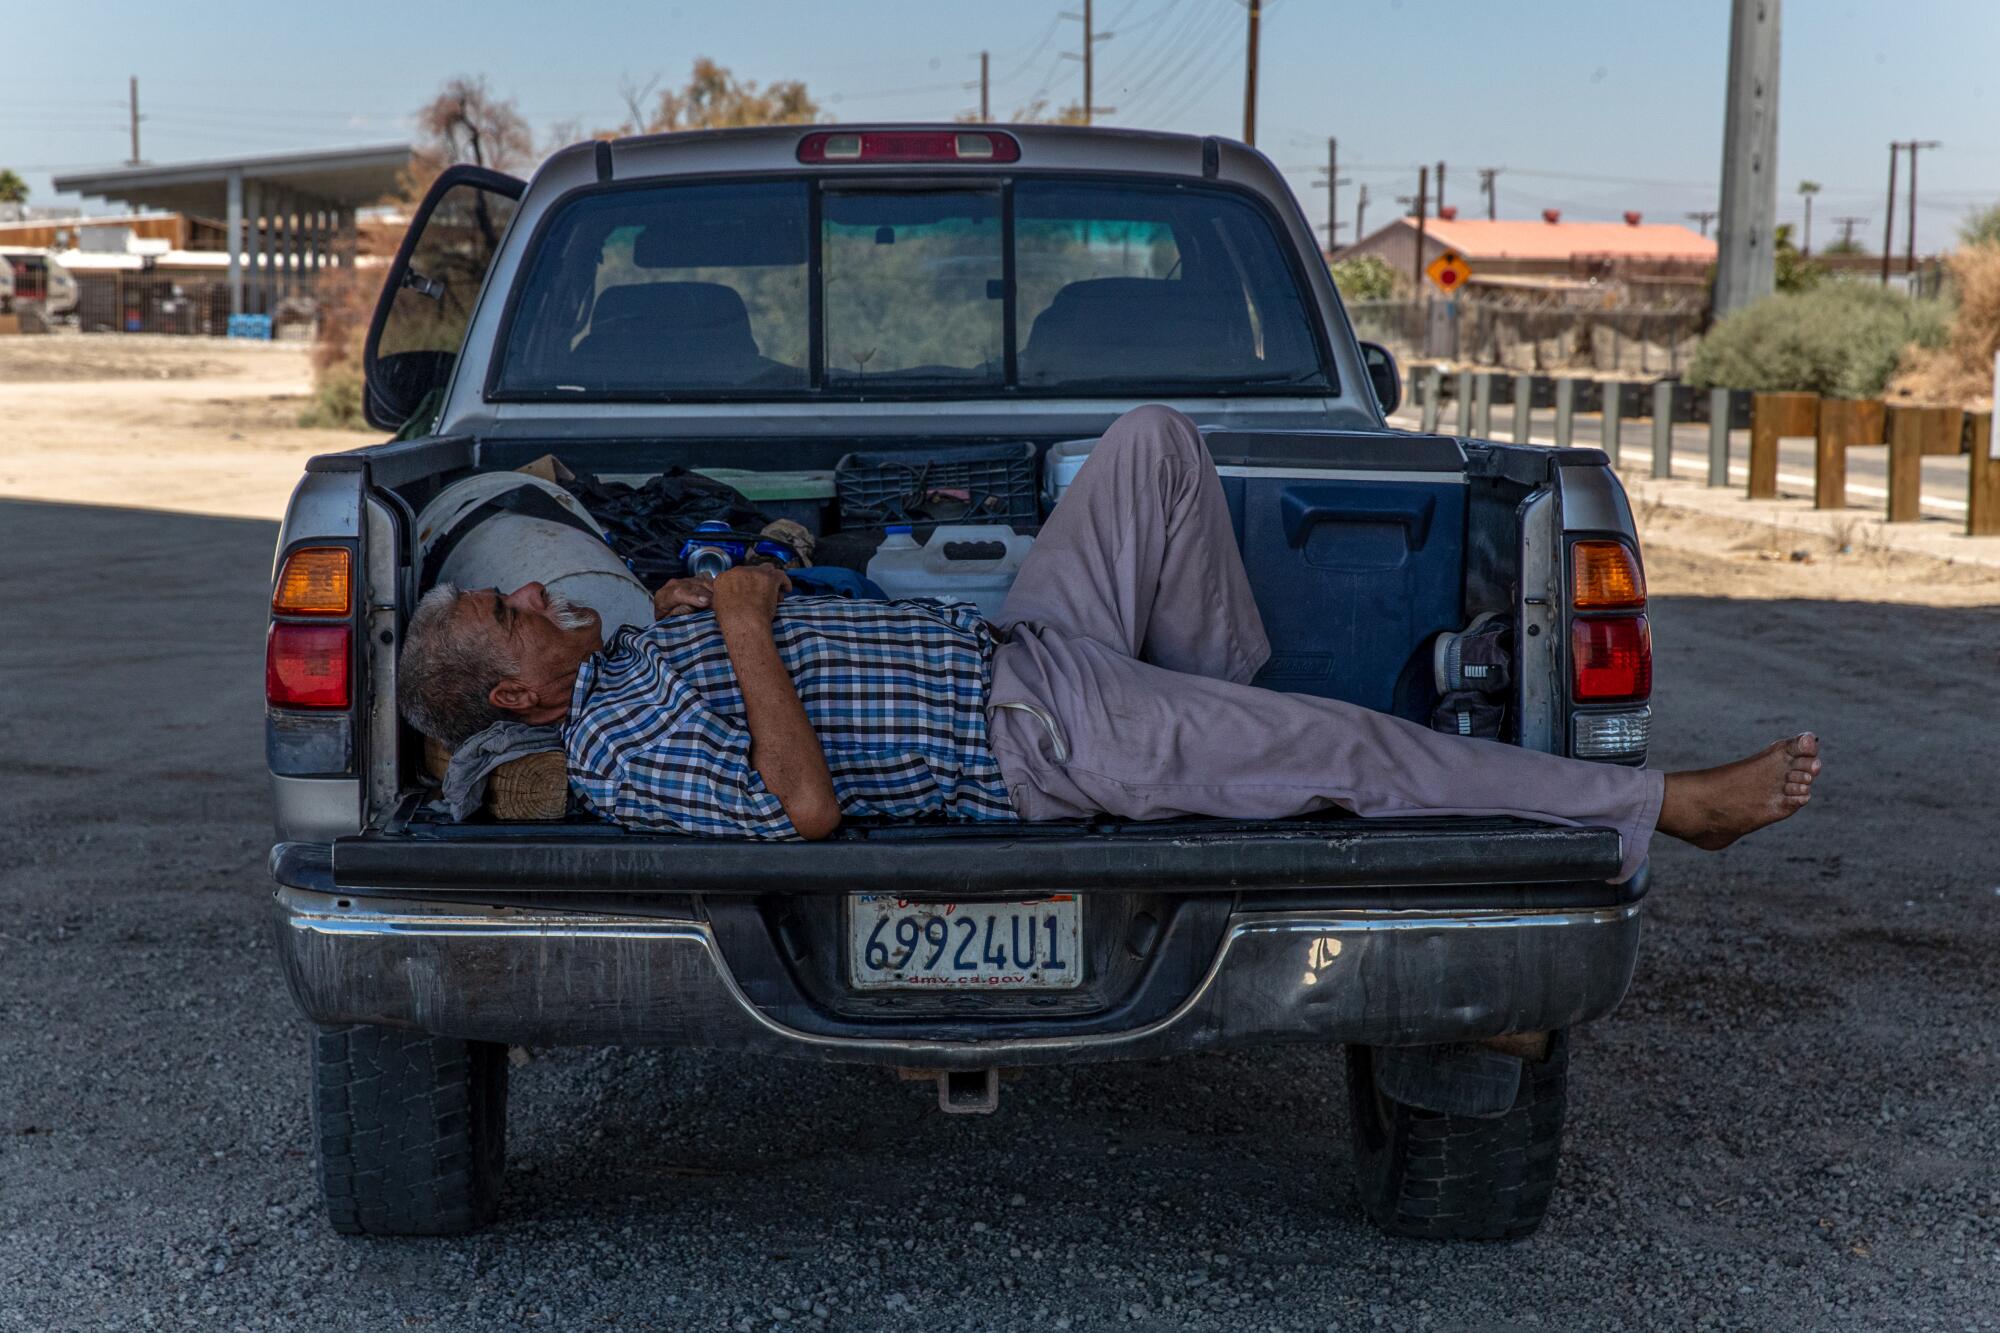 A farmworker sleeps in a pickup truck in the shade of the Avenue 66 Bridge in Mecca, Calif.